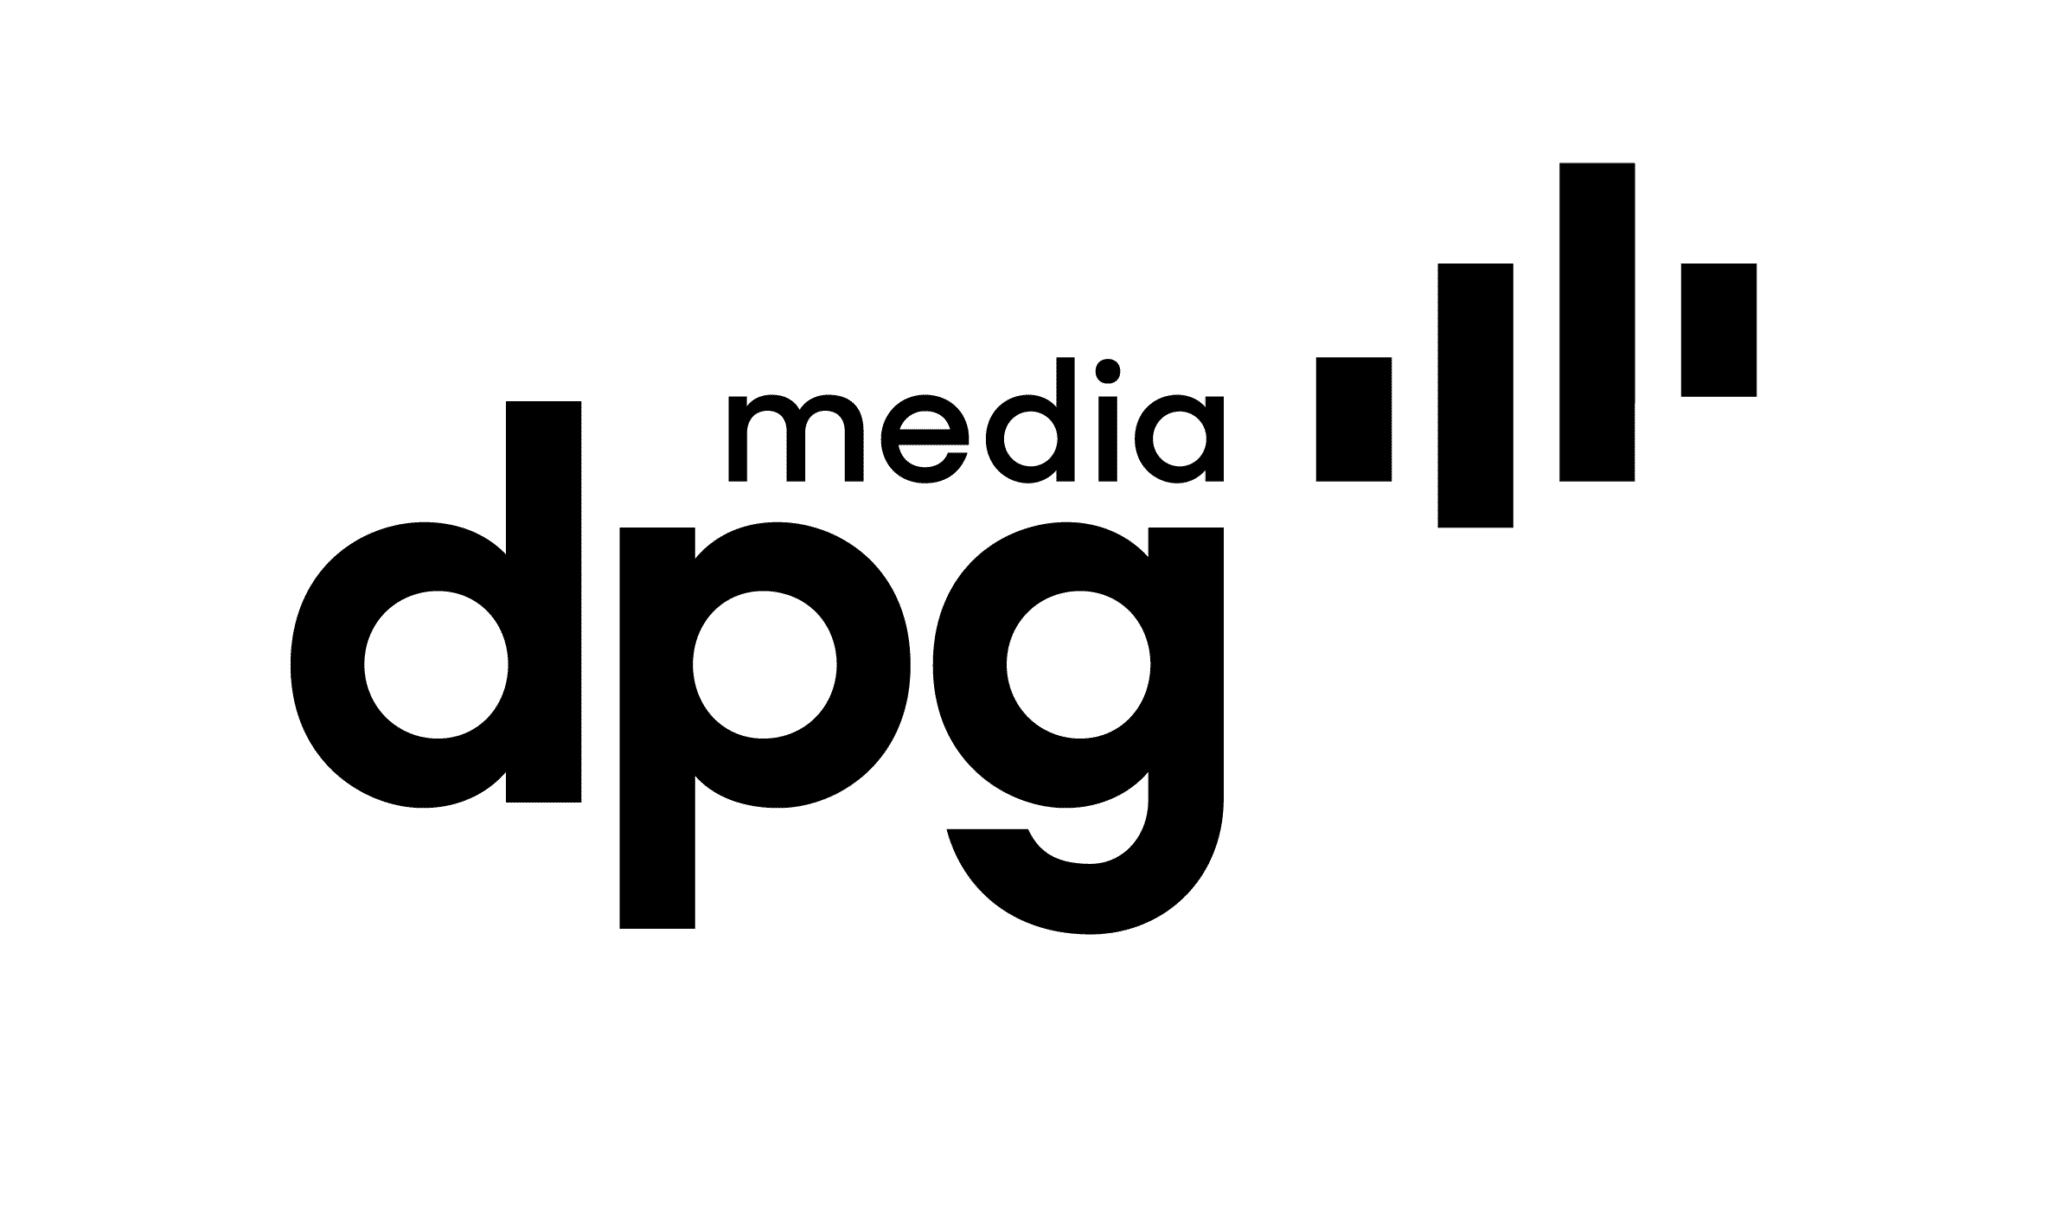 DPG Media, supported by Limecraft